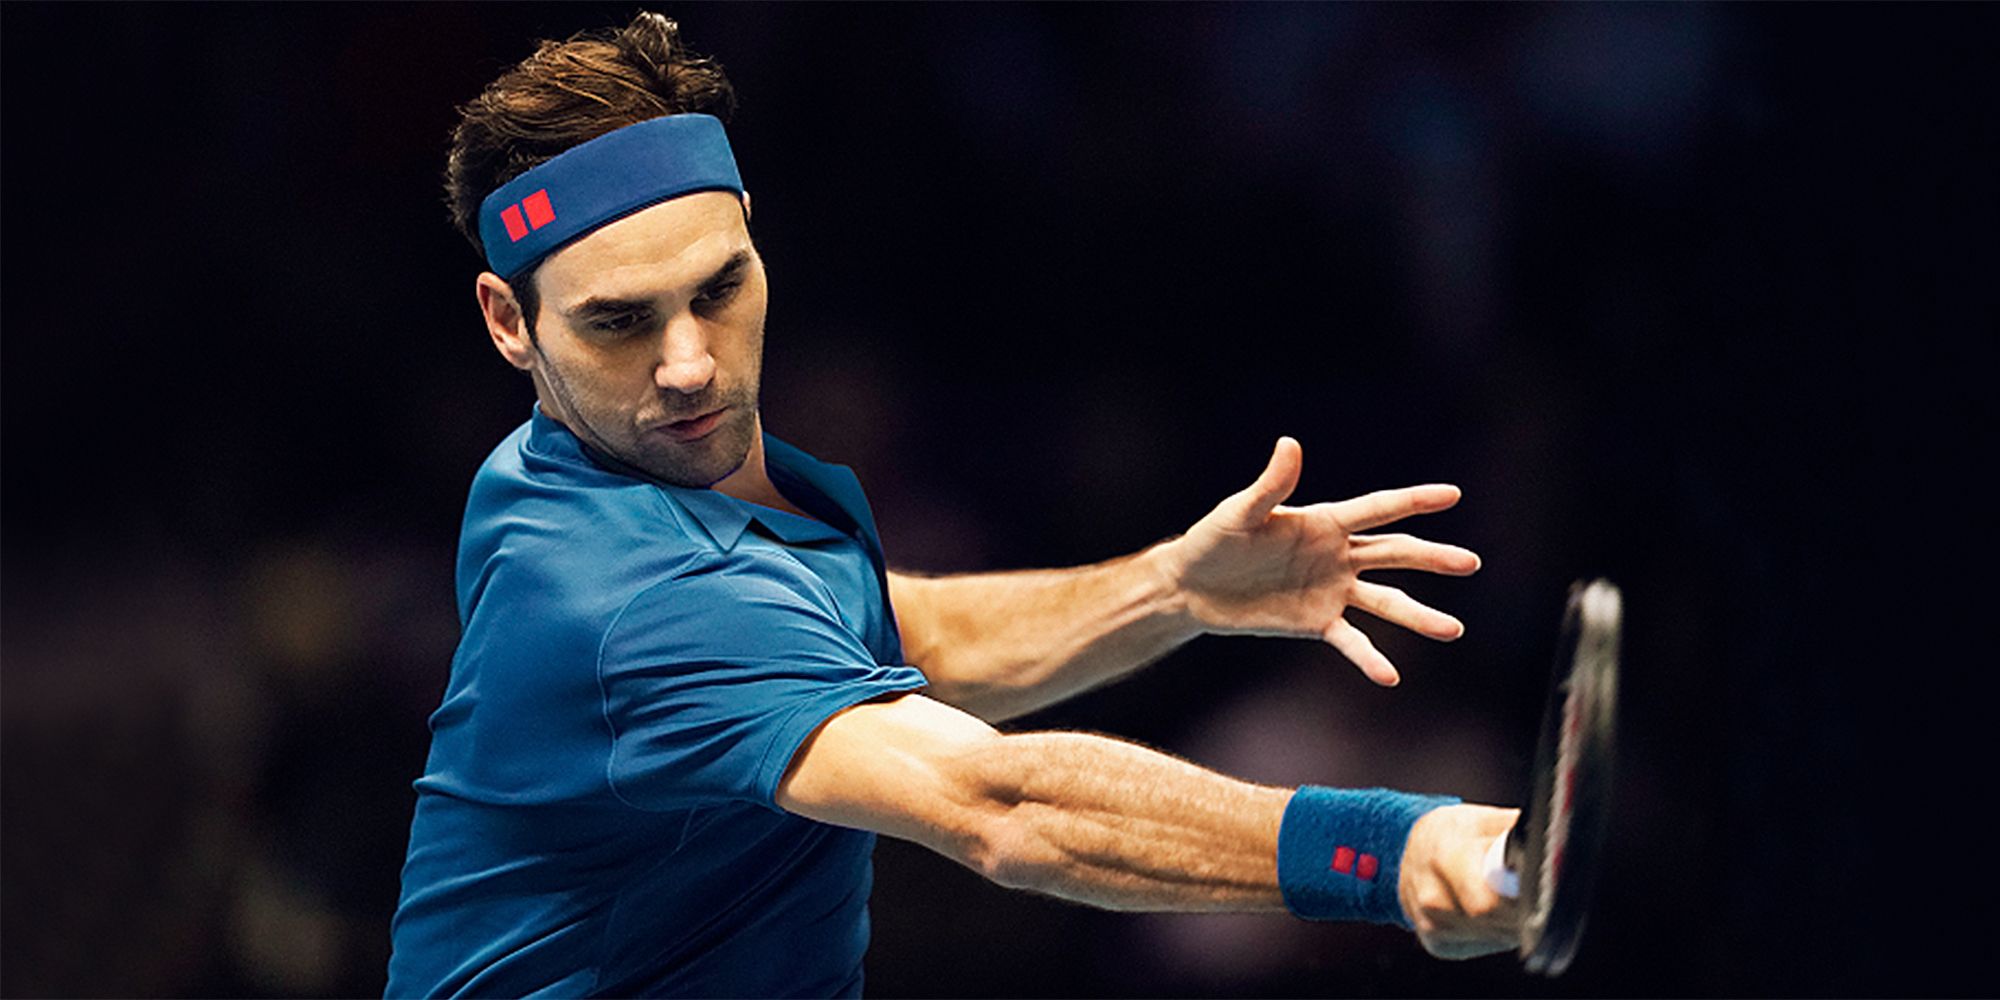 Roger Federers Latest Uniqlo Tennis Gear Is as Stylish as the Man Himself